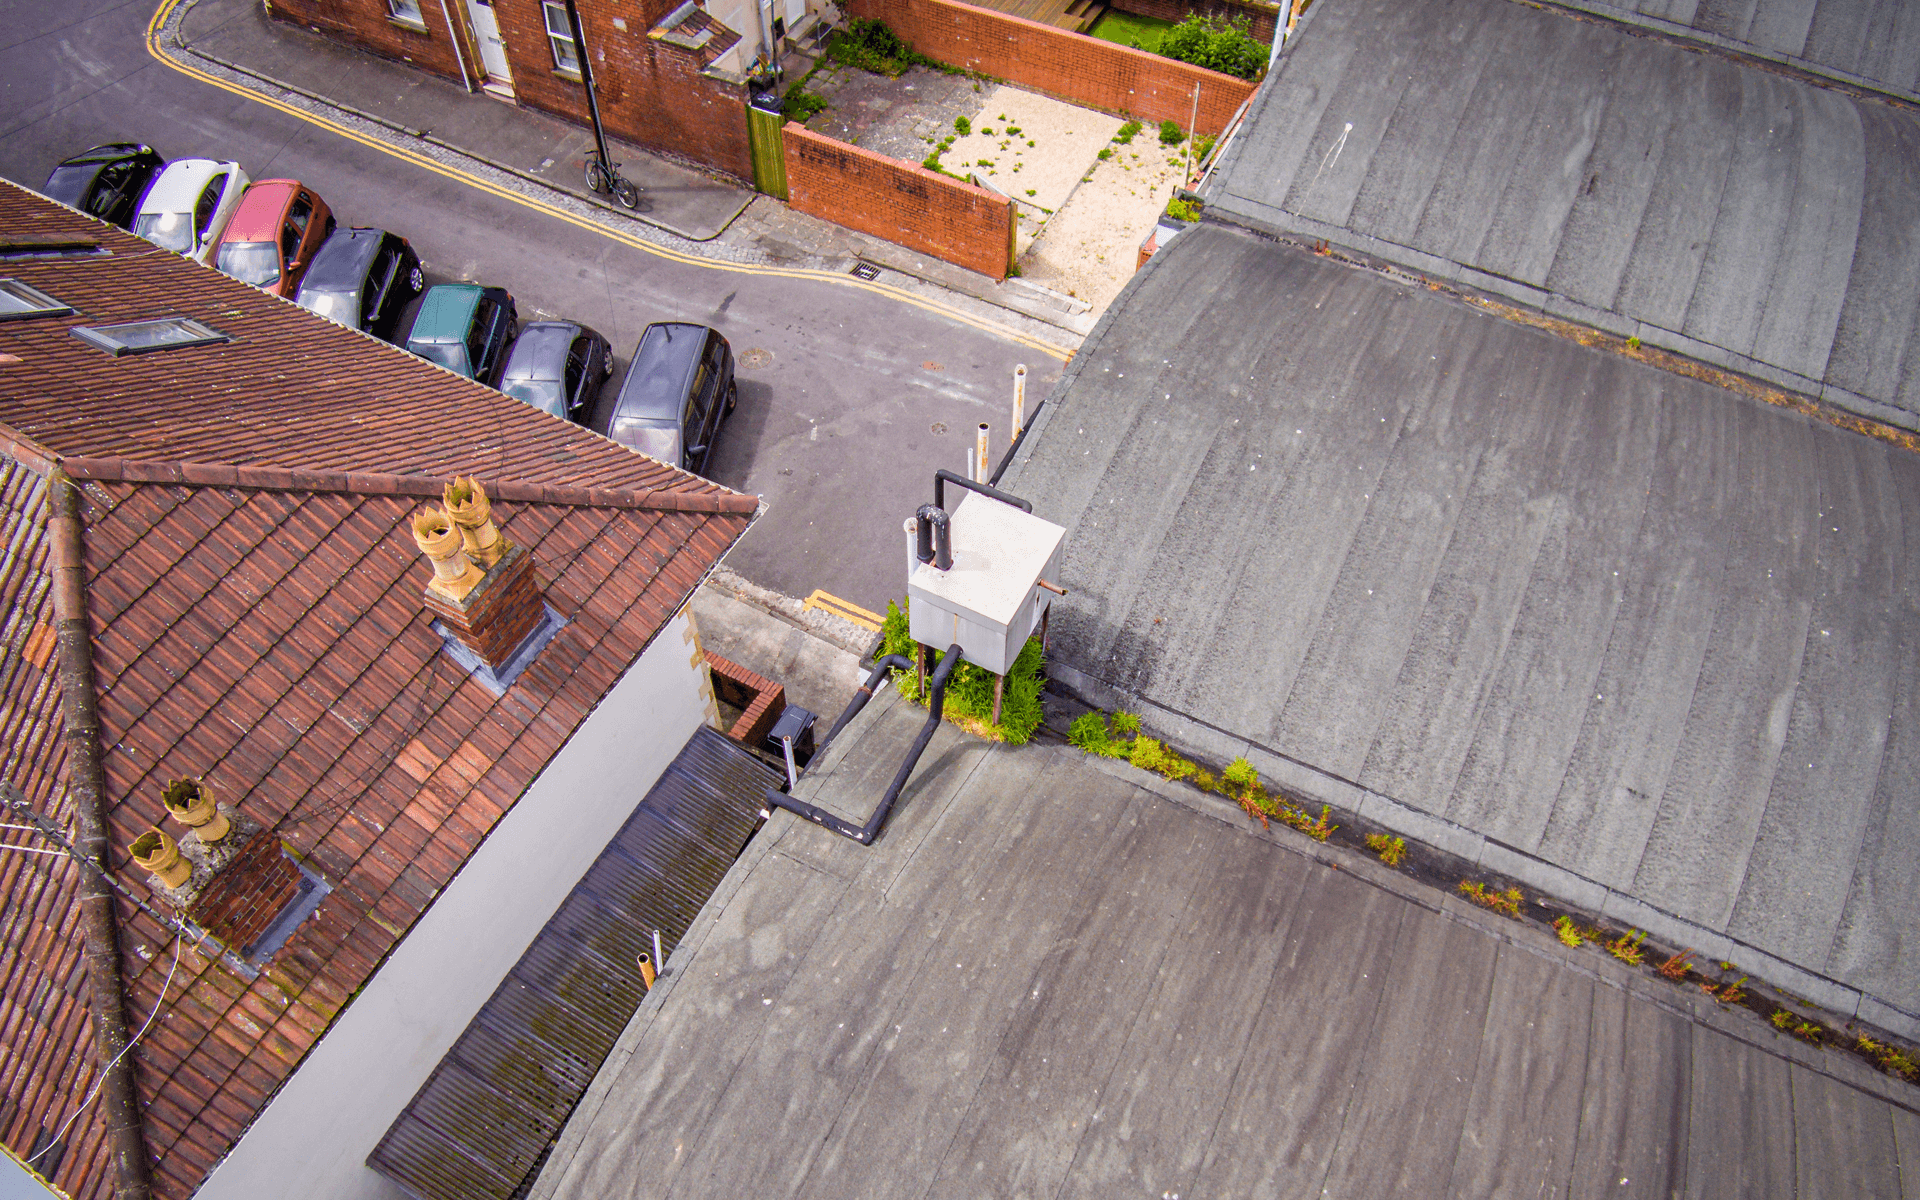 "DJI Inspire 1" aerial drone photo for a roof survey in Bedminster, Bristol showing an air conditioning unit